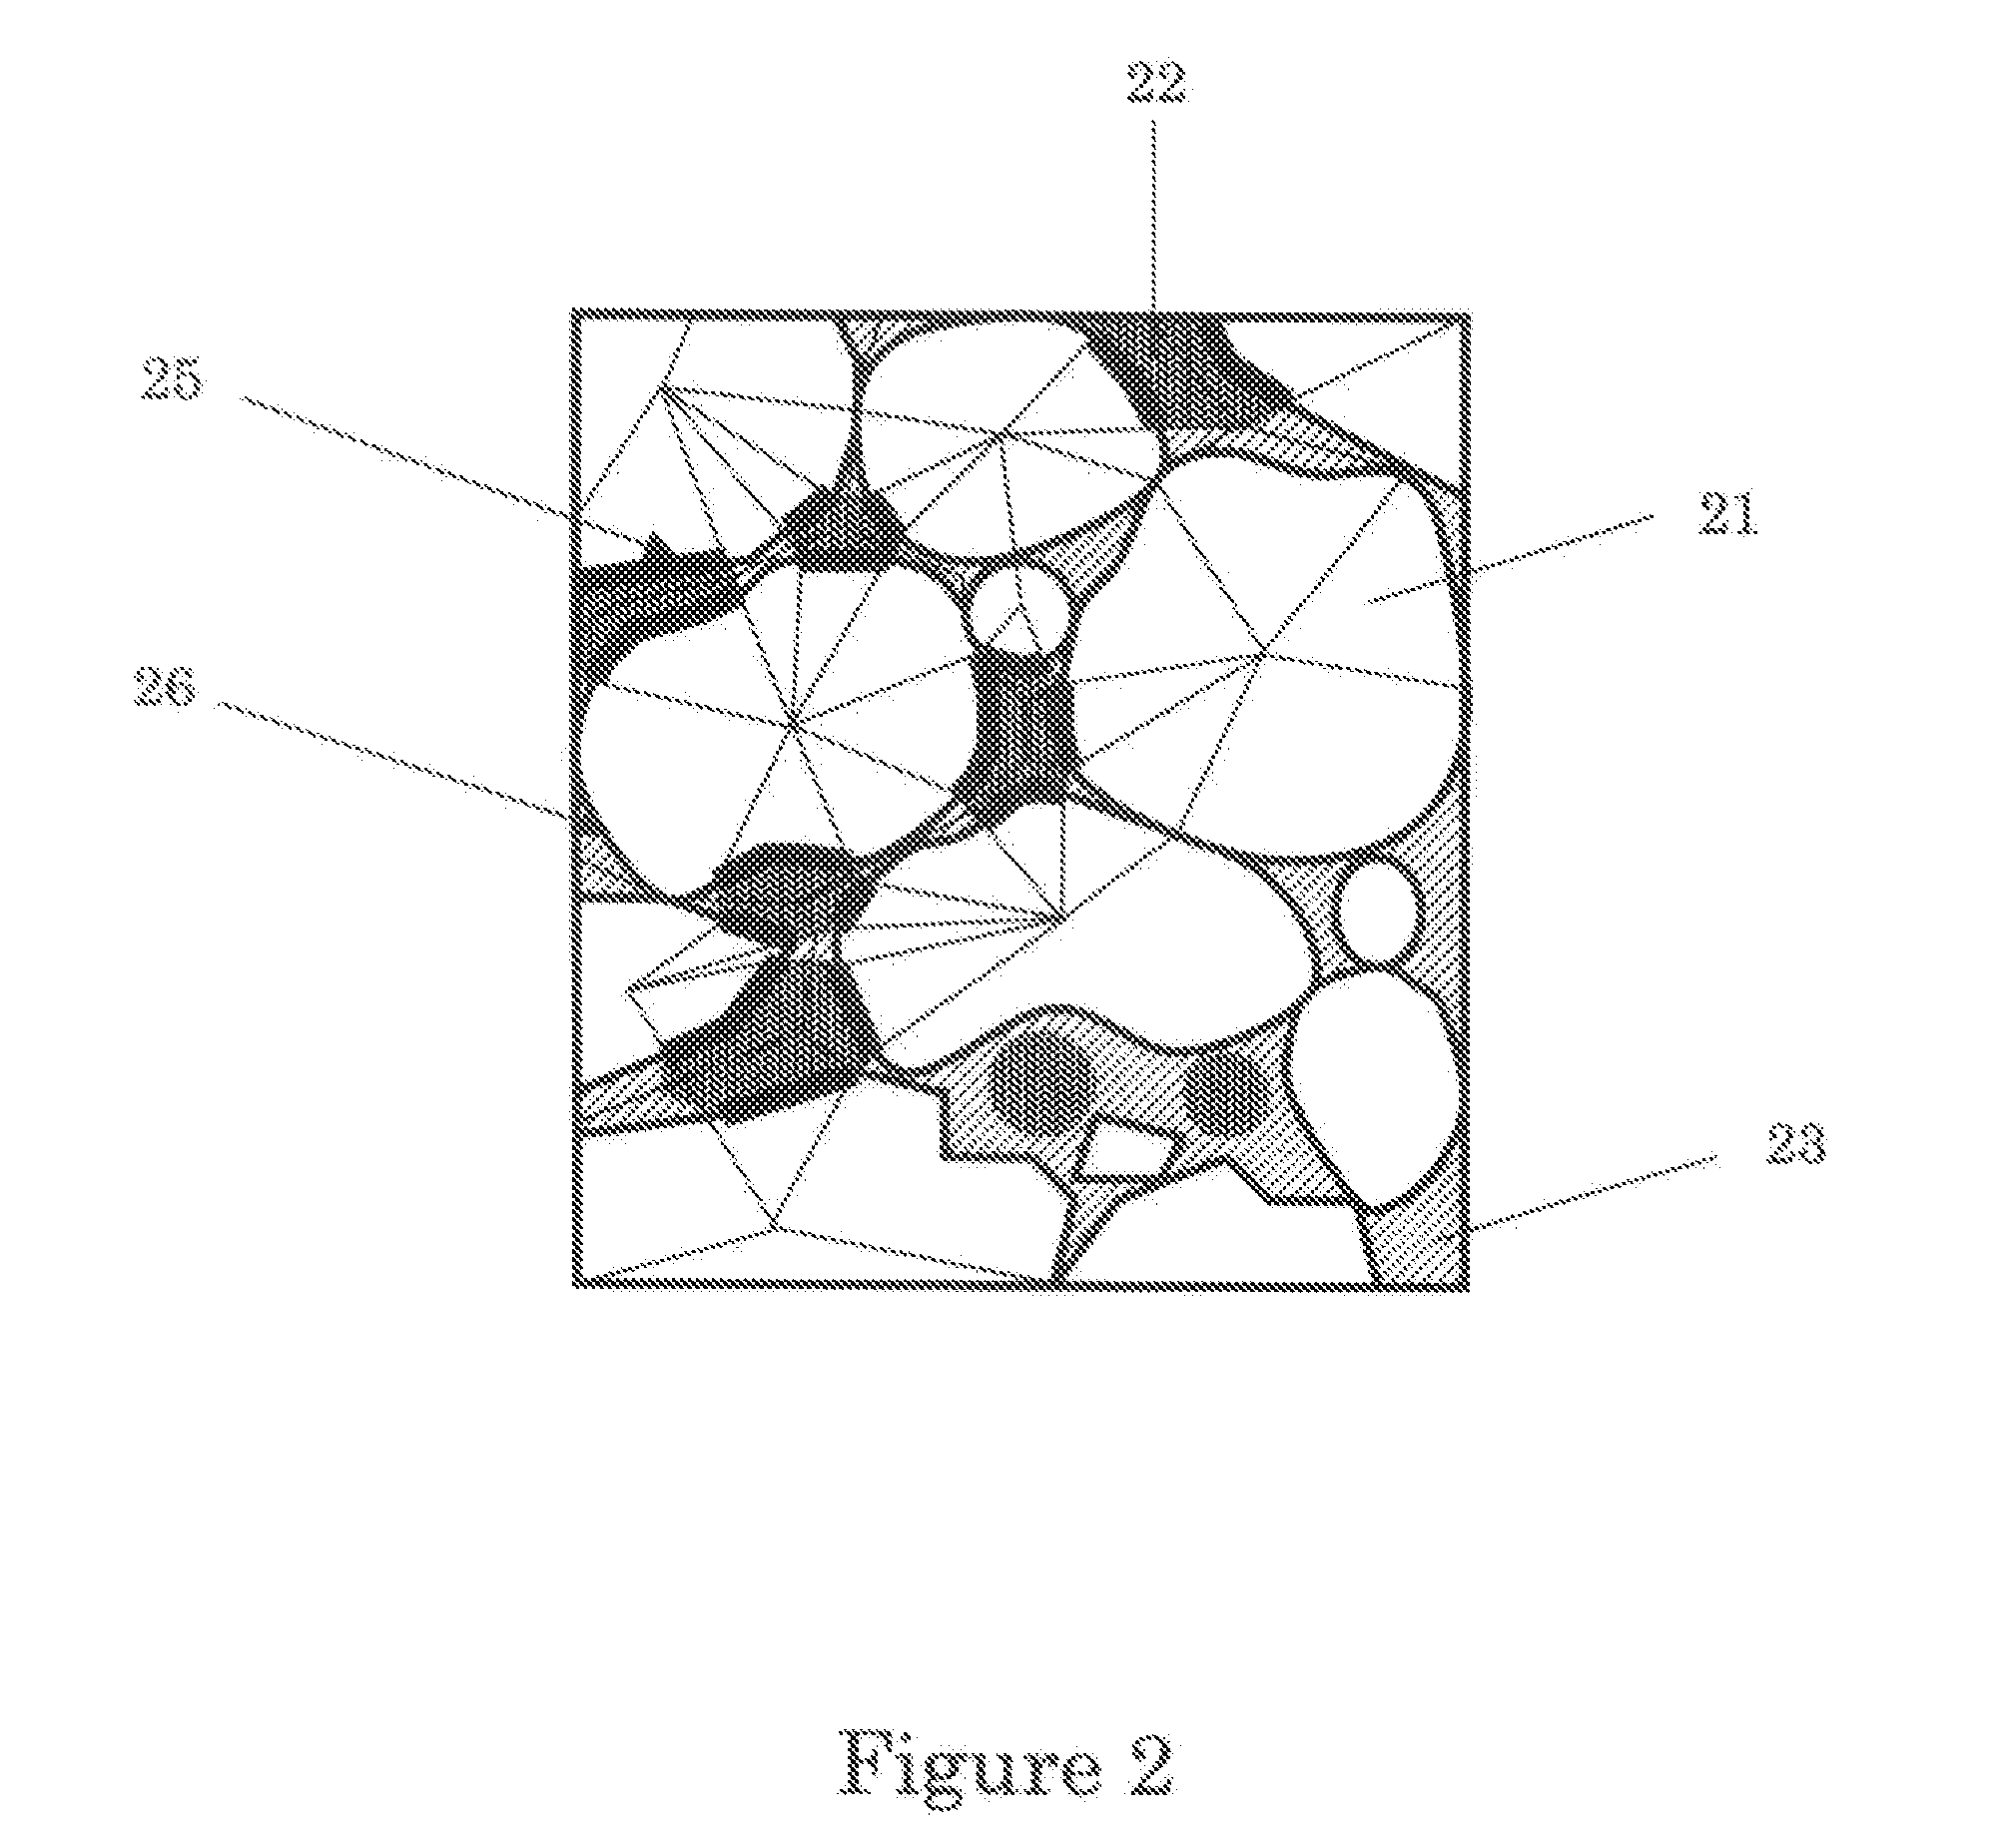 Method and Apparatus for Measuring the Wettability of Geological Formations